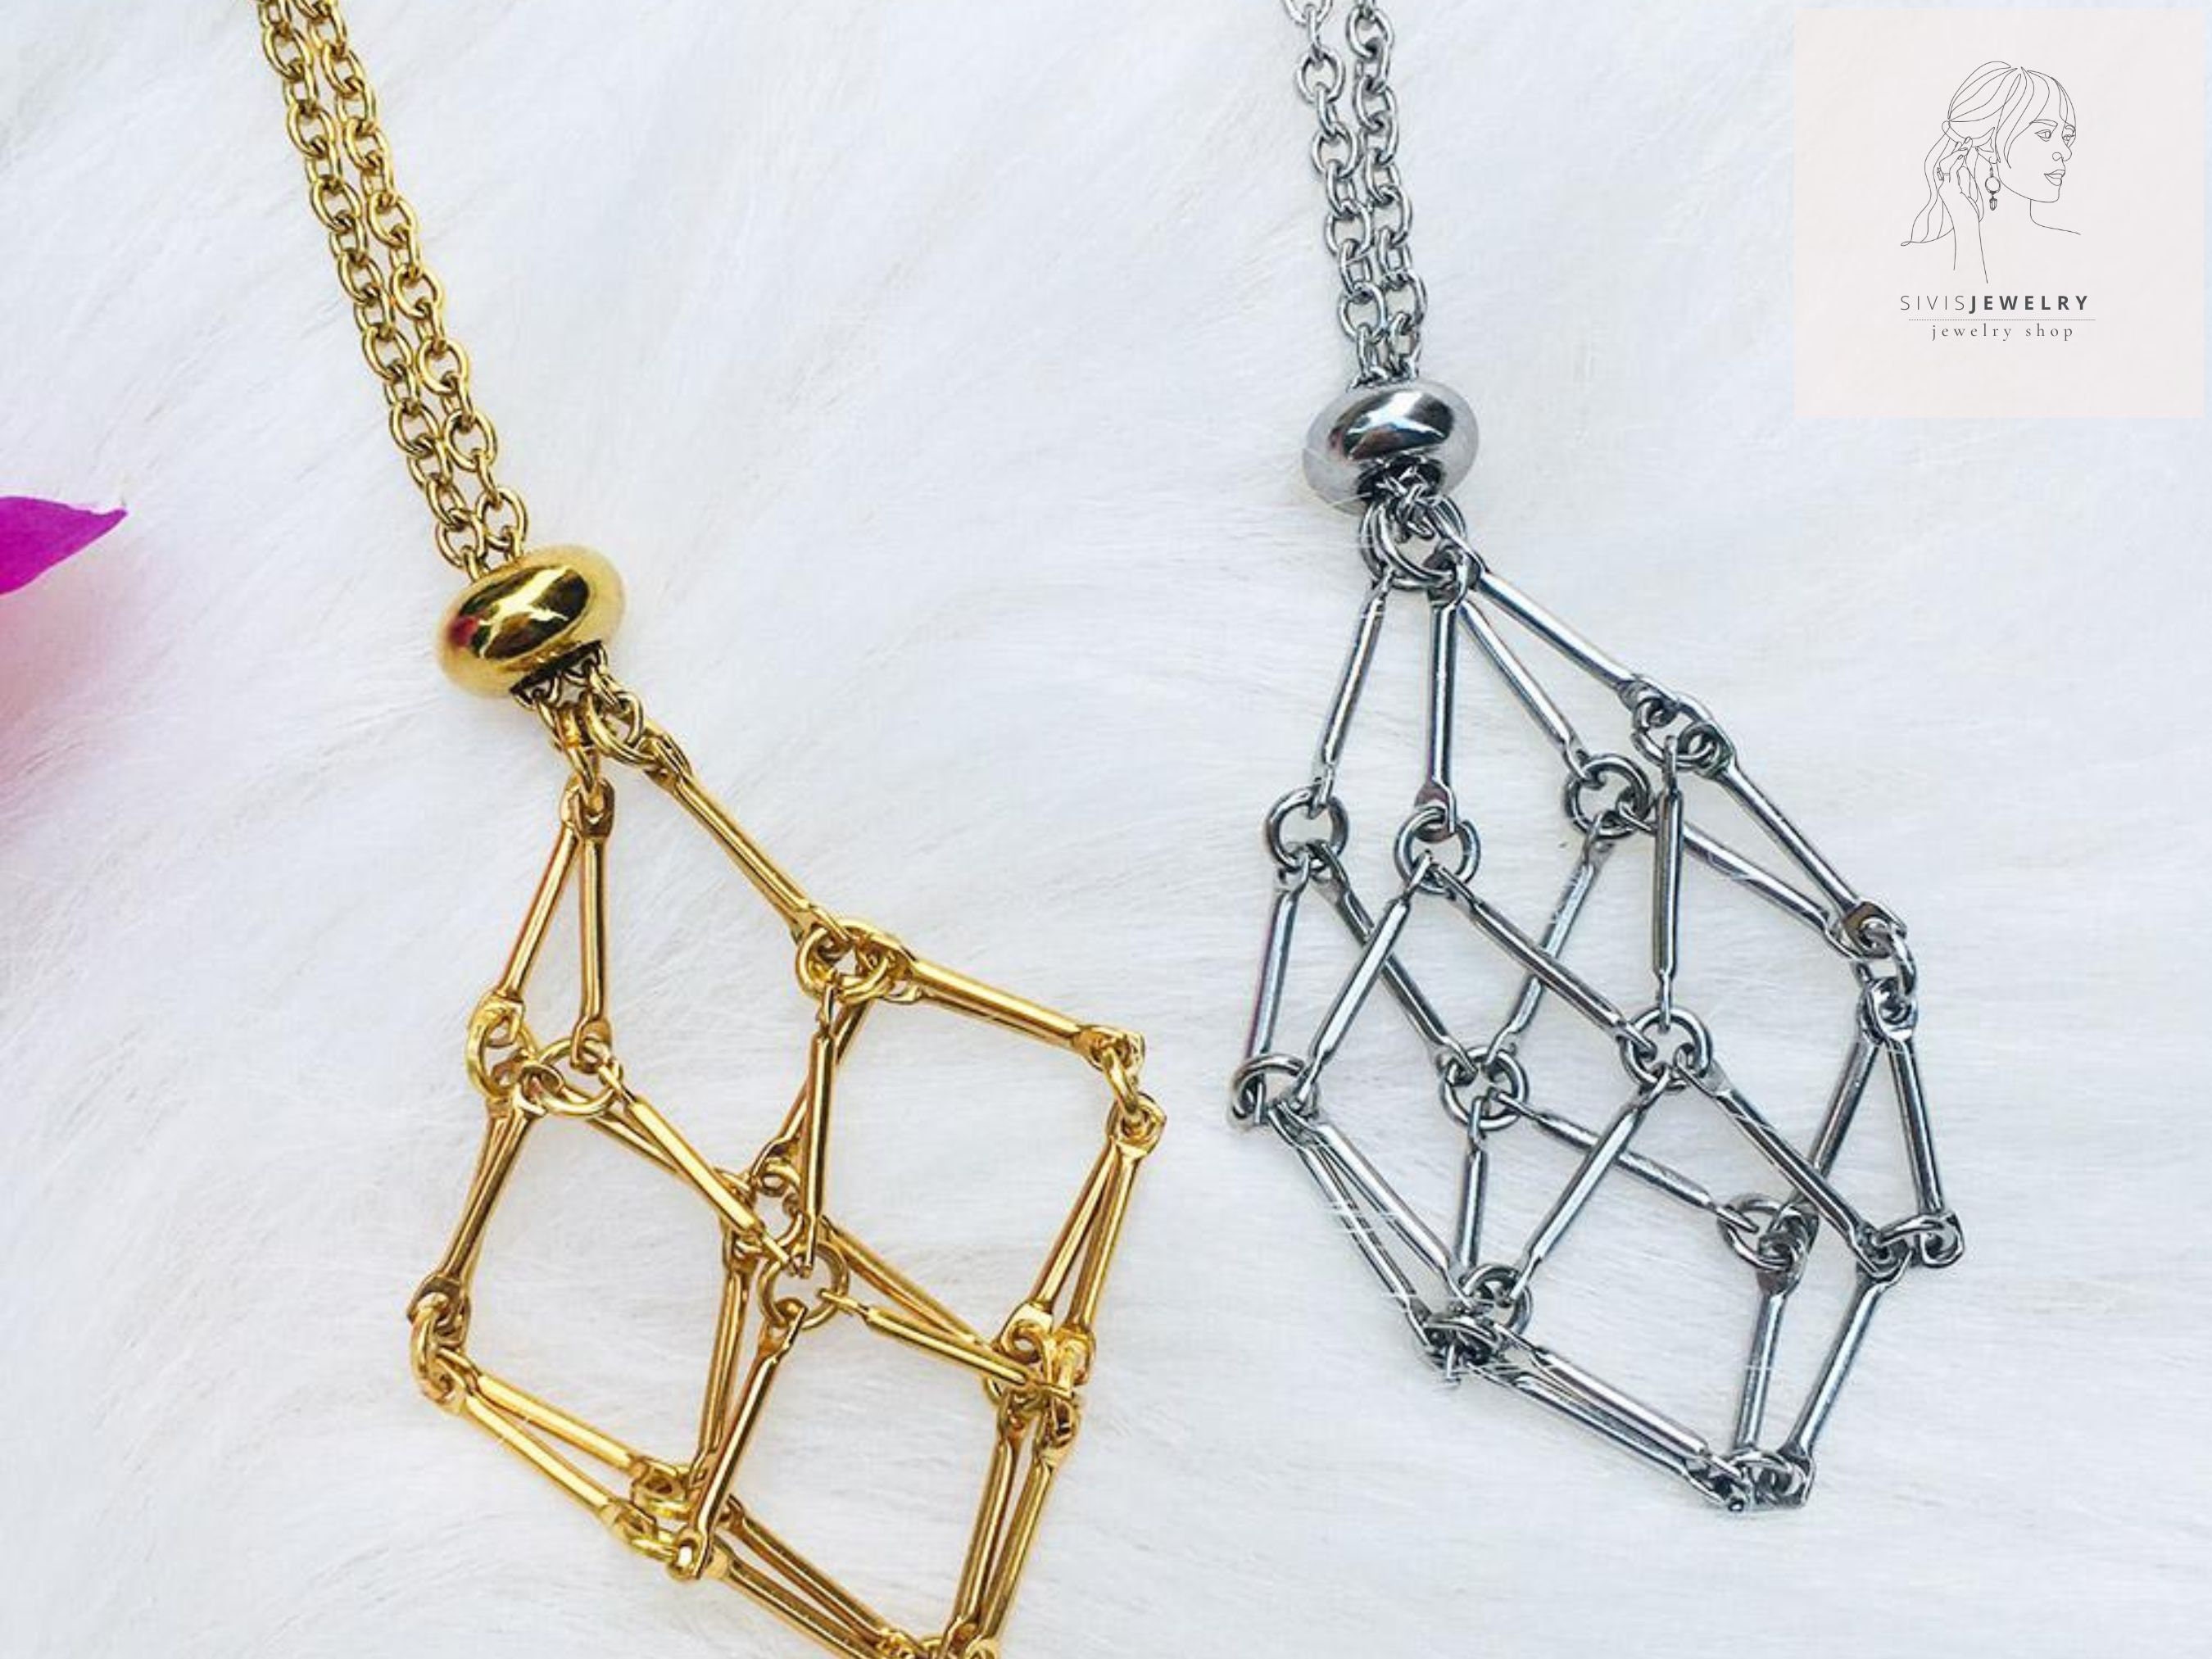 Crystal Cage Necklace | Color: Brown | Size: Os | Pm-98658453's Closet